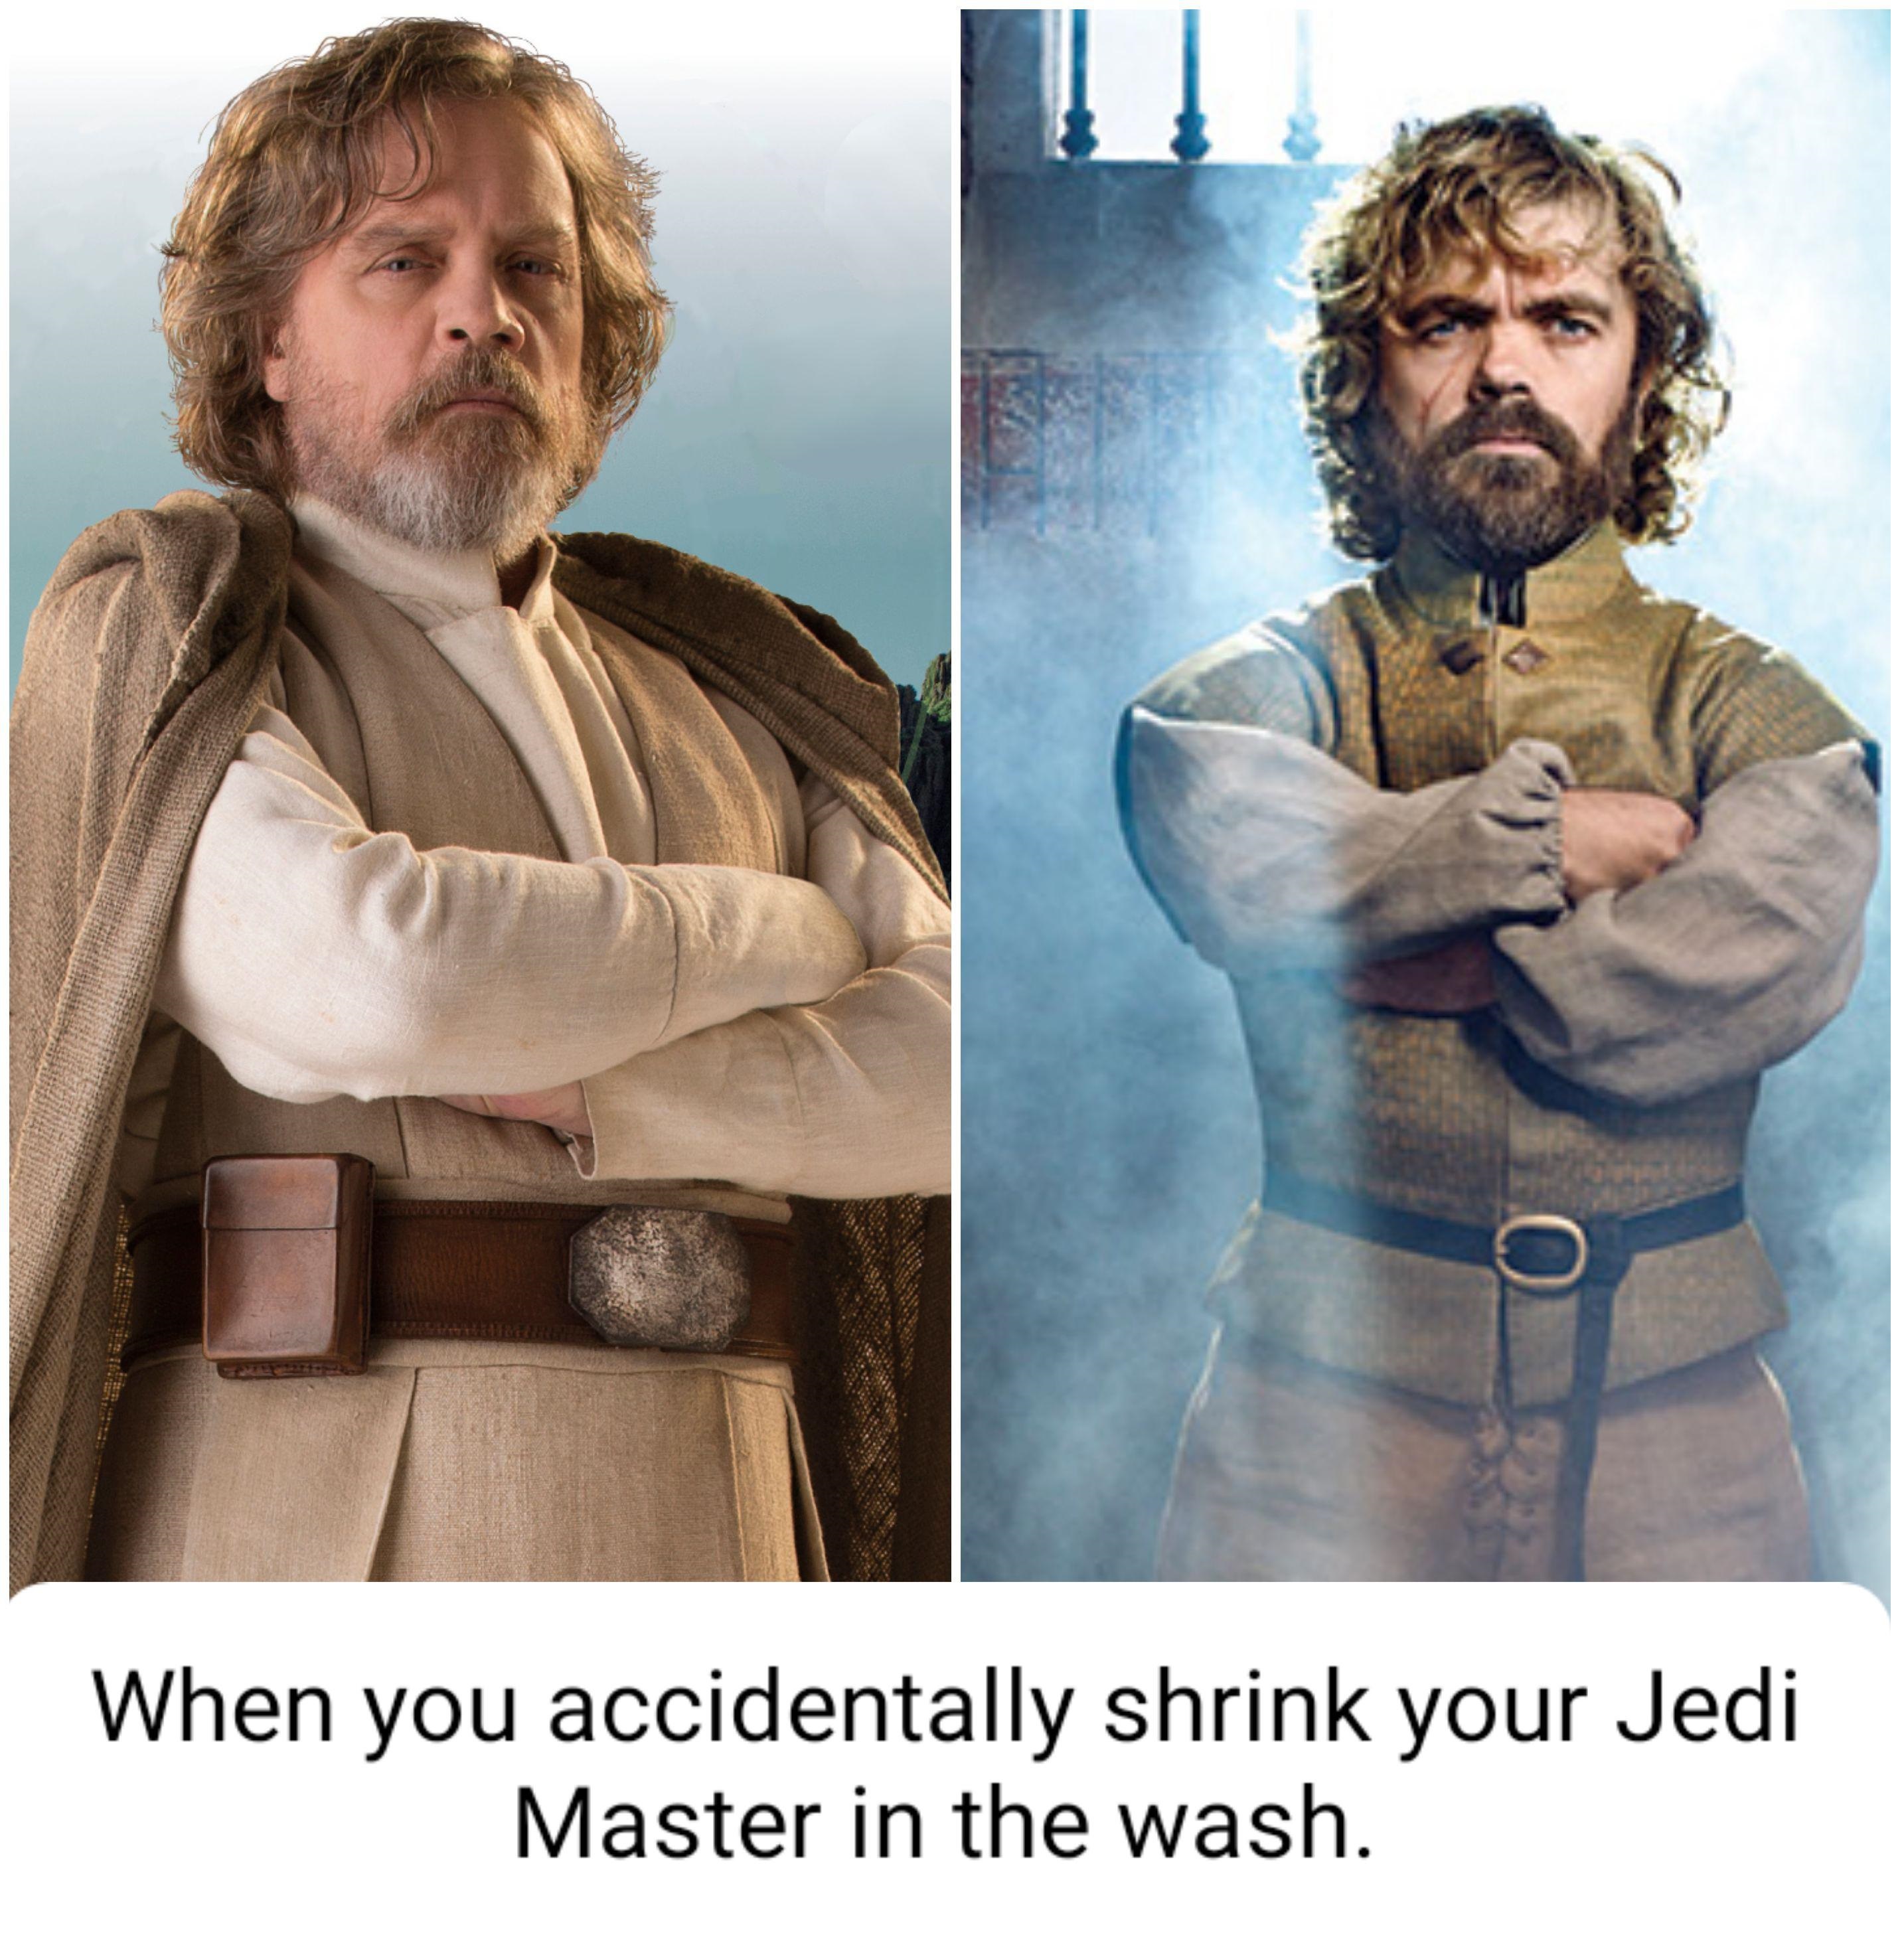 Peter Dinklage - When you accidentally shrink your Jedi Master in the wash.